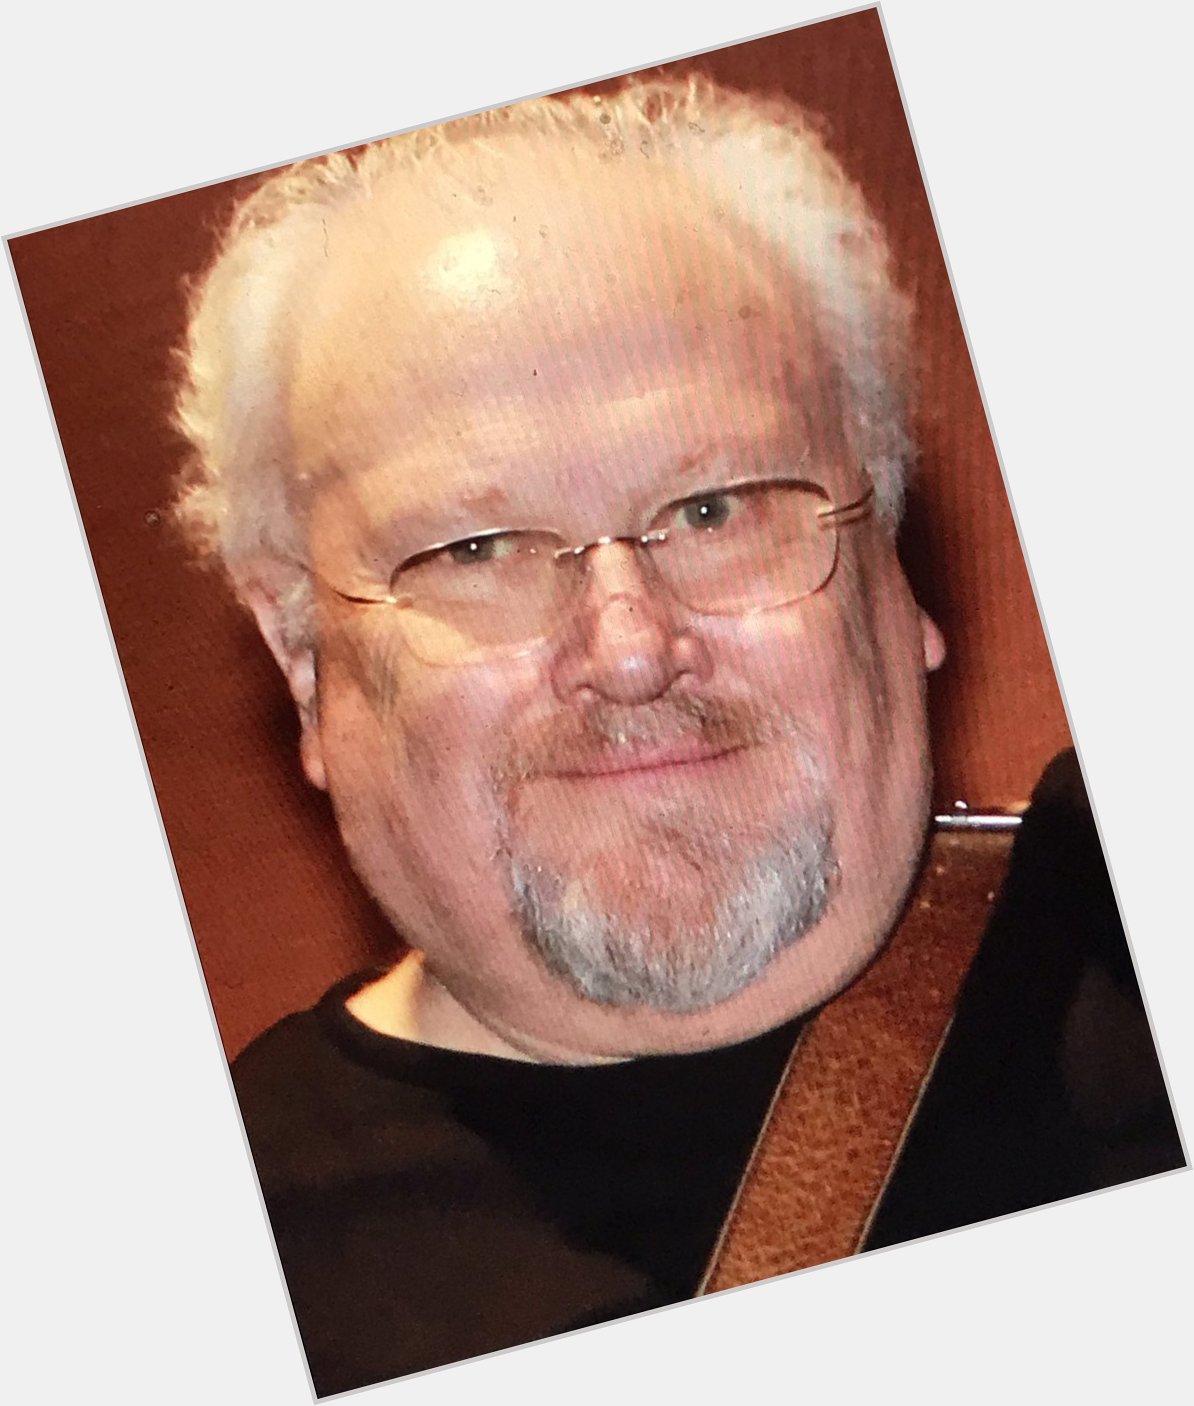 I would like to wish former Doctor Who, Colin Baker a happy 79th birthday today 